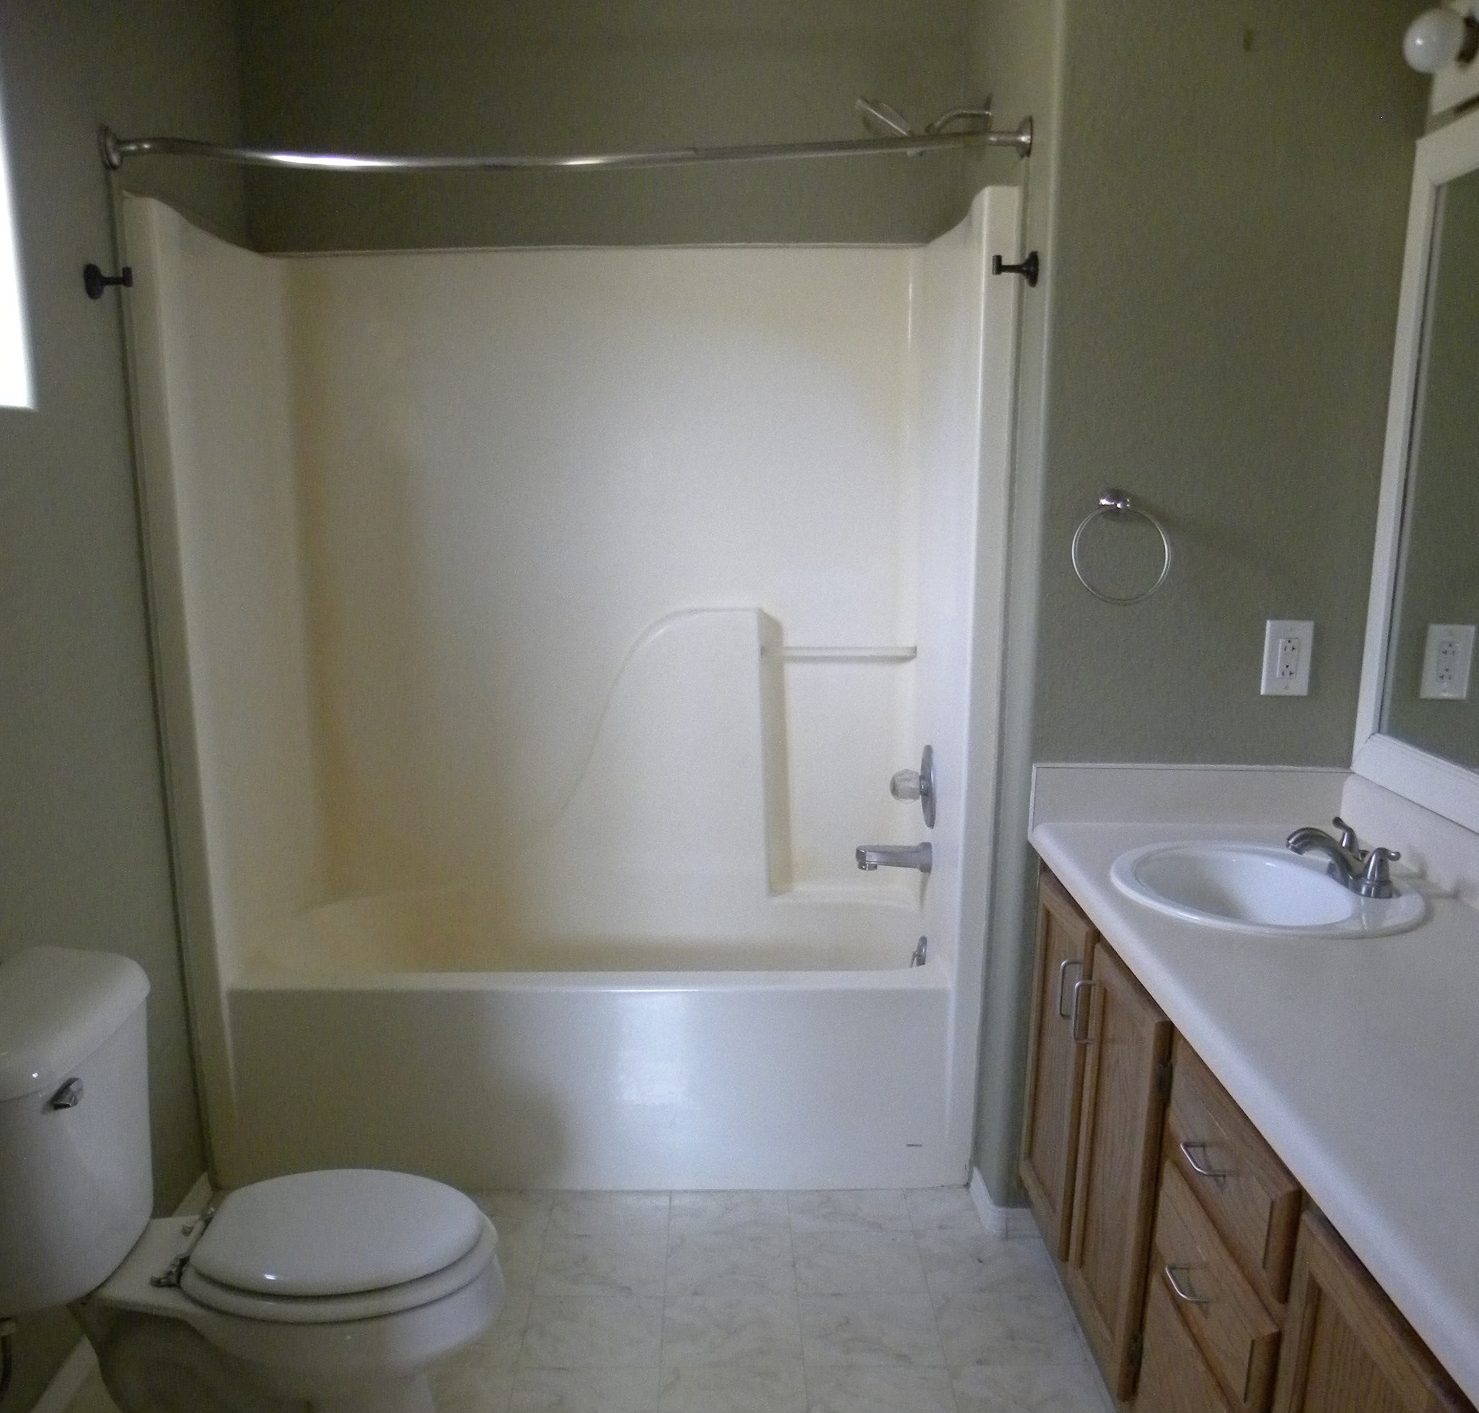 Before photo of a residential bathroom with white countertops and wooden cabinets, a white toilet, a white shower, and white marbled tiles.